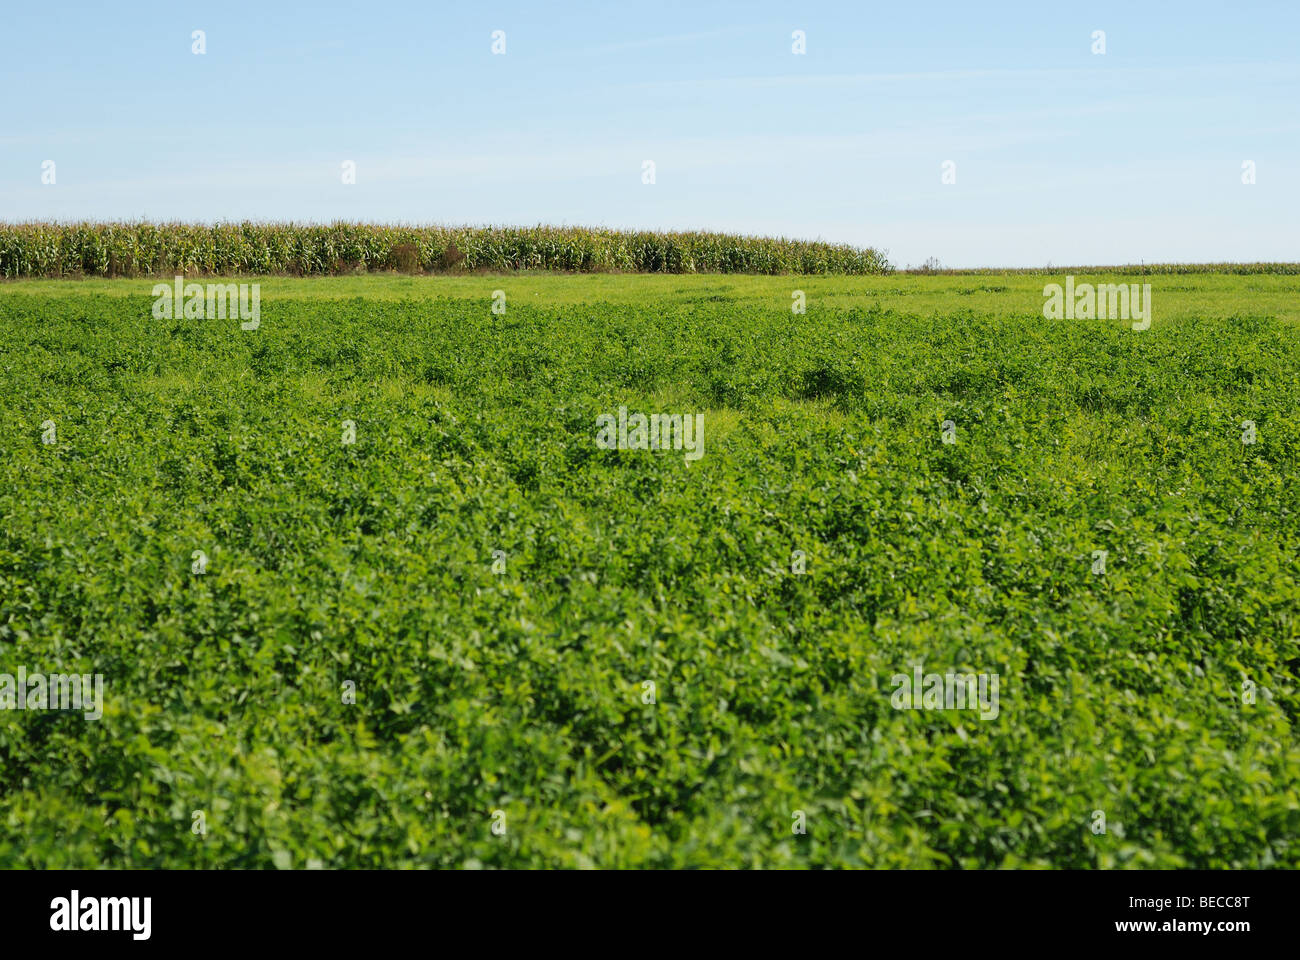 Field of alfalfa in agricultural area Stock Photo